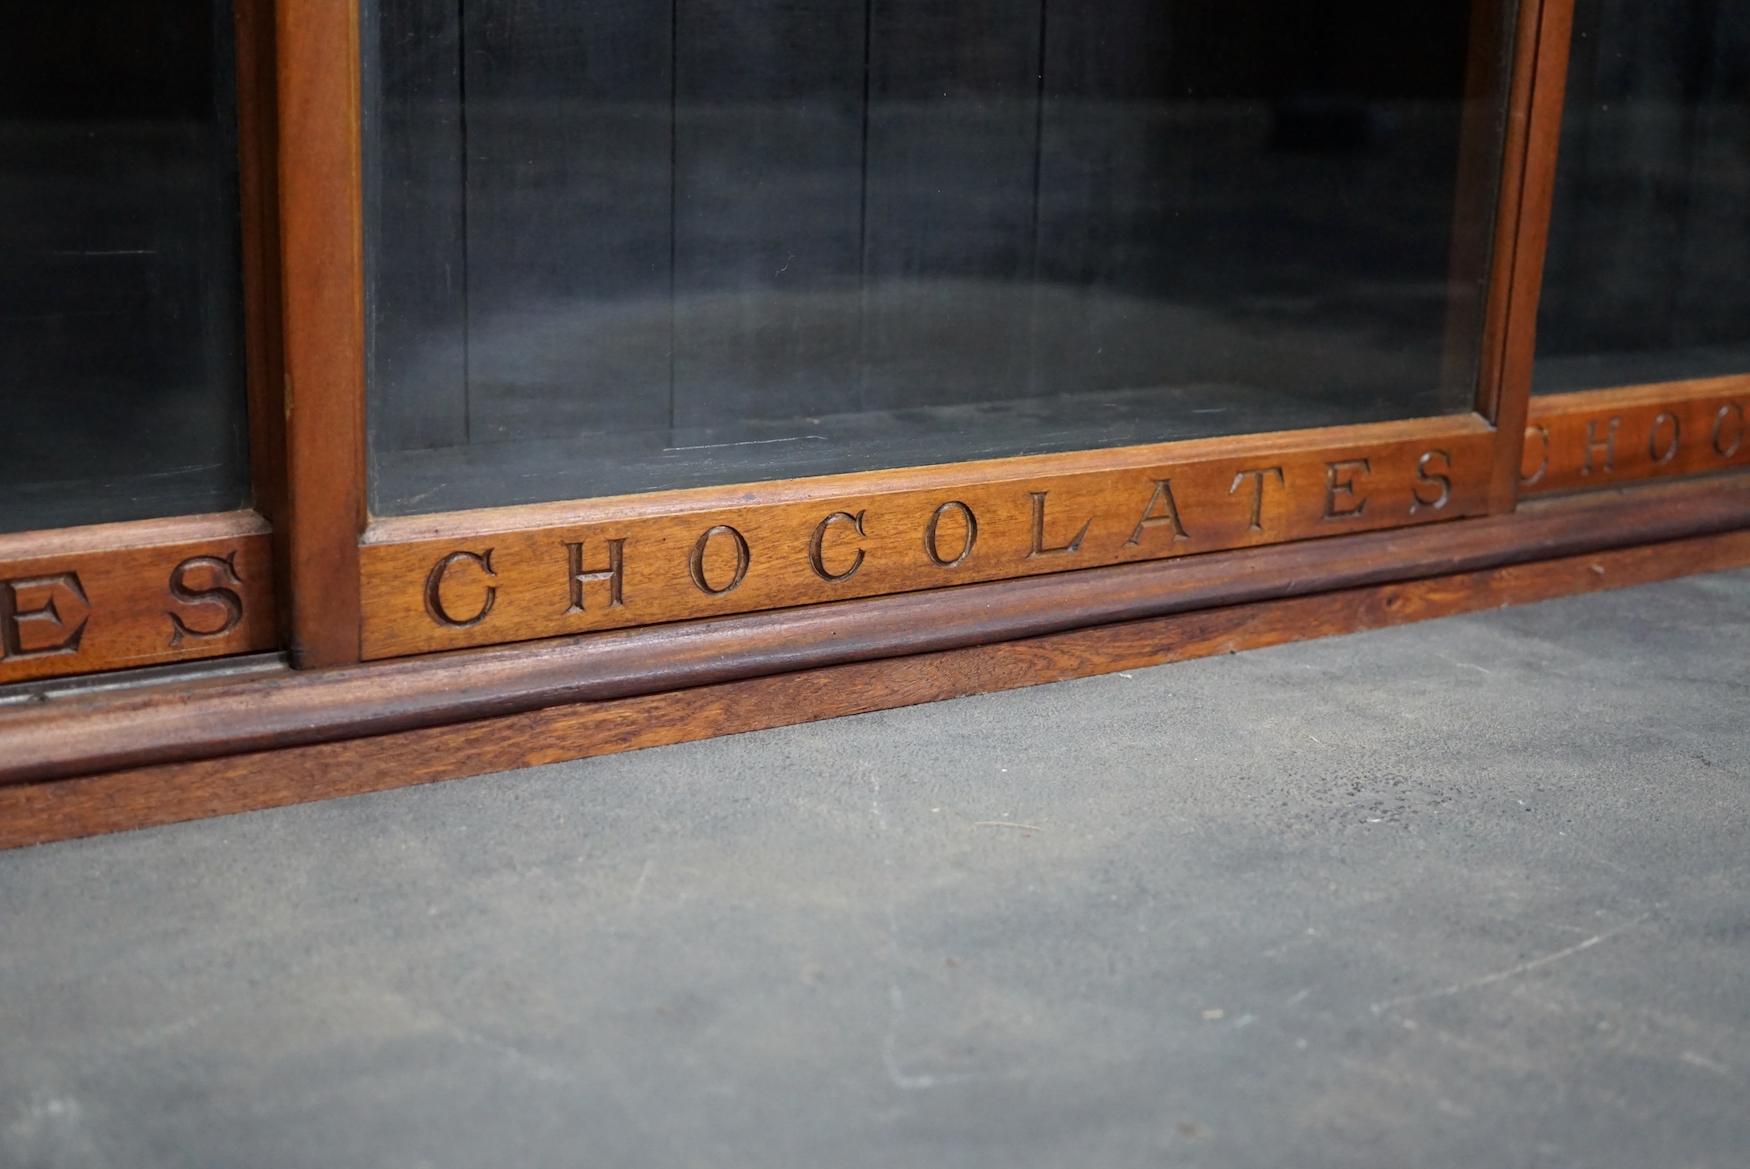 Fry's Chocolates Mahogany Shop Display Cabinet or Vitrine, Late 19th Century For Sale 2